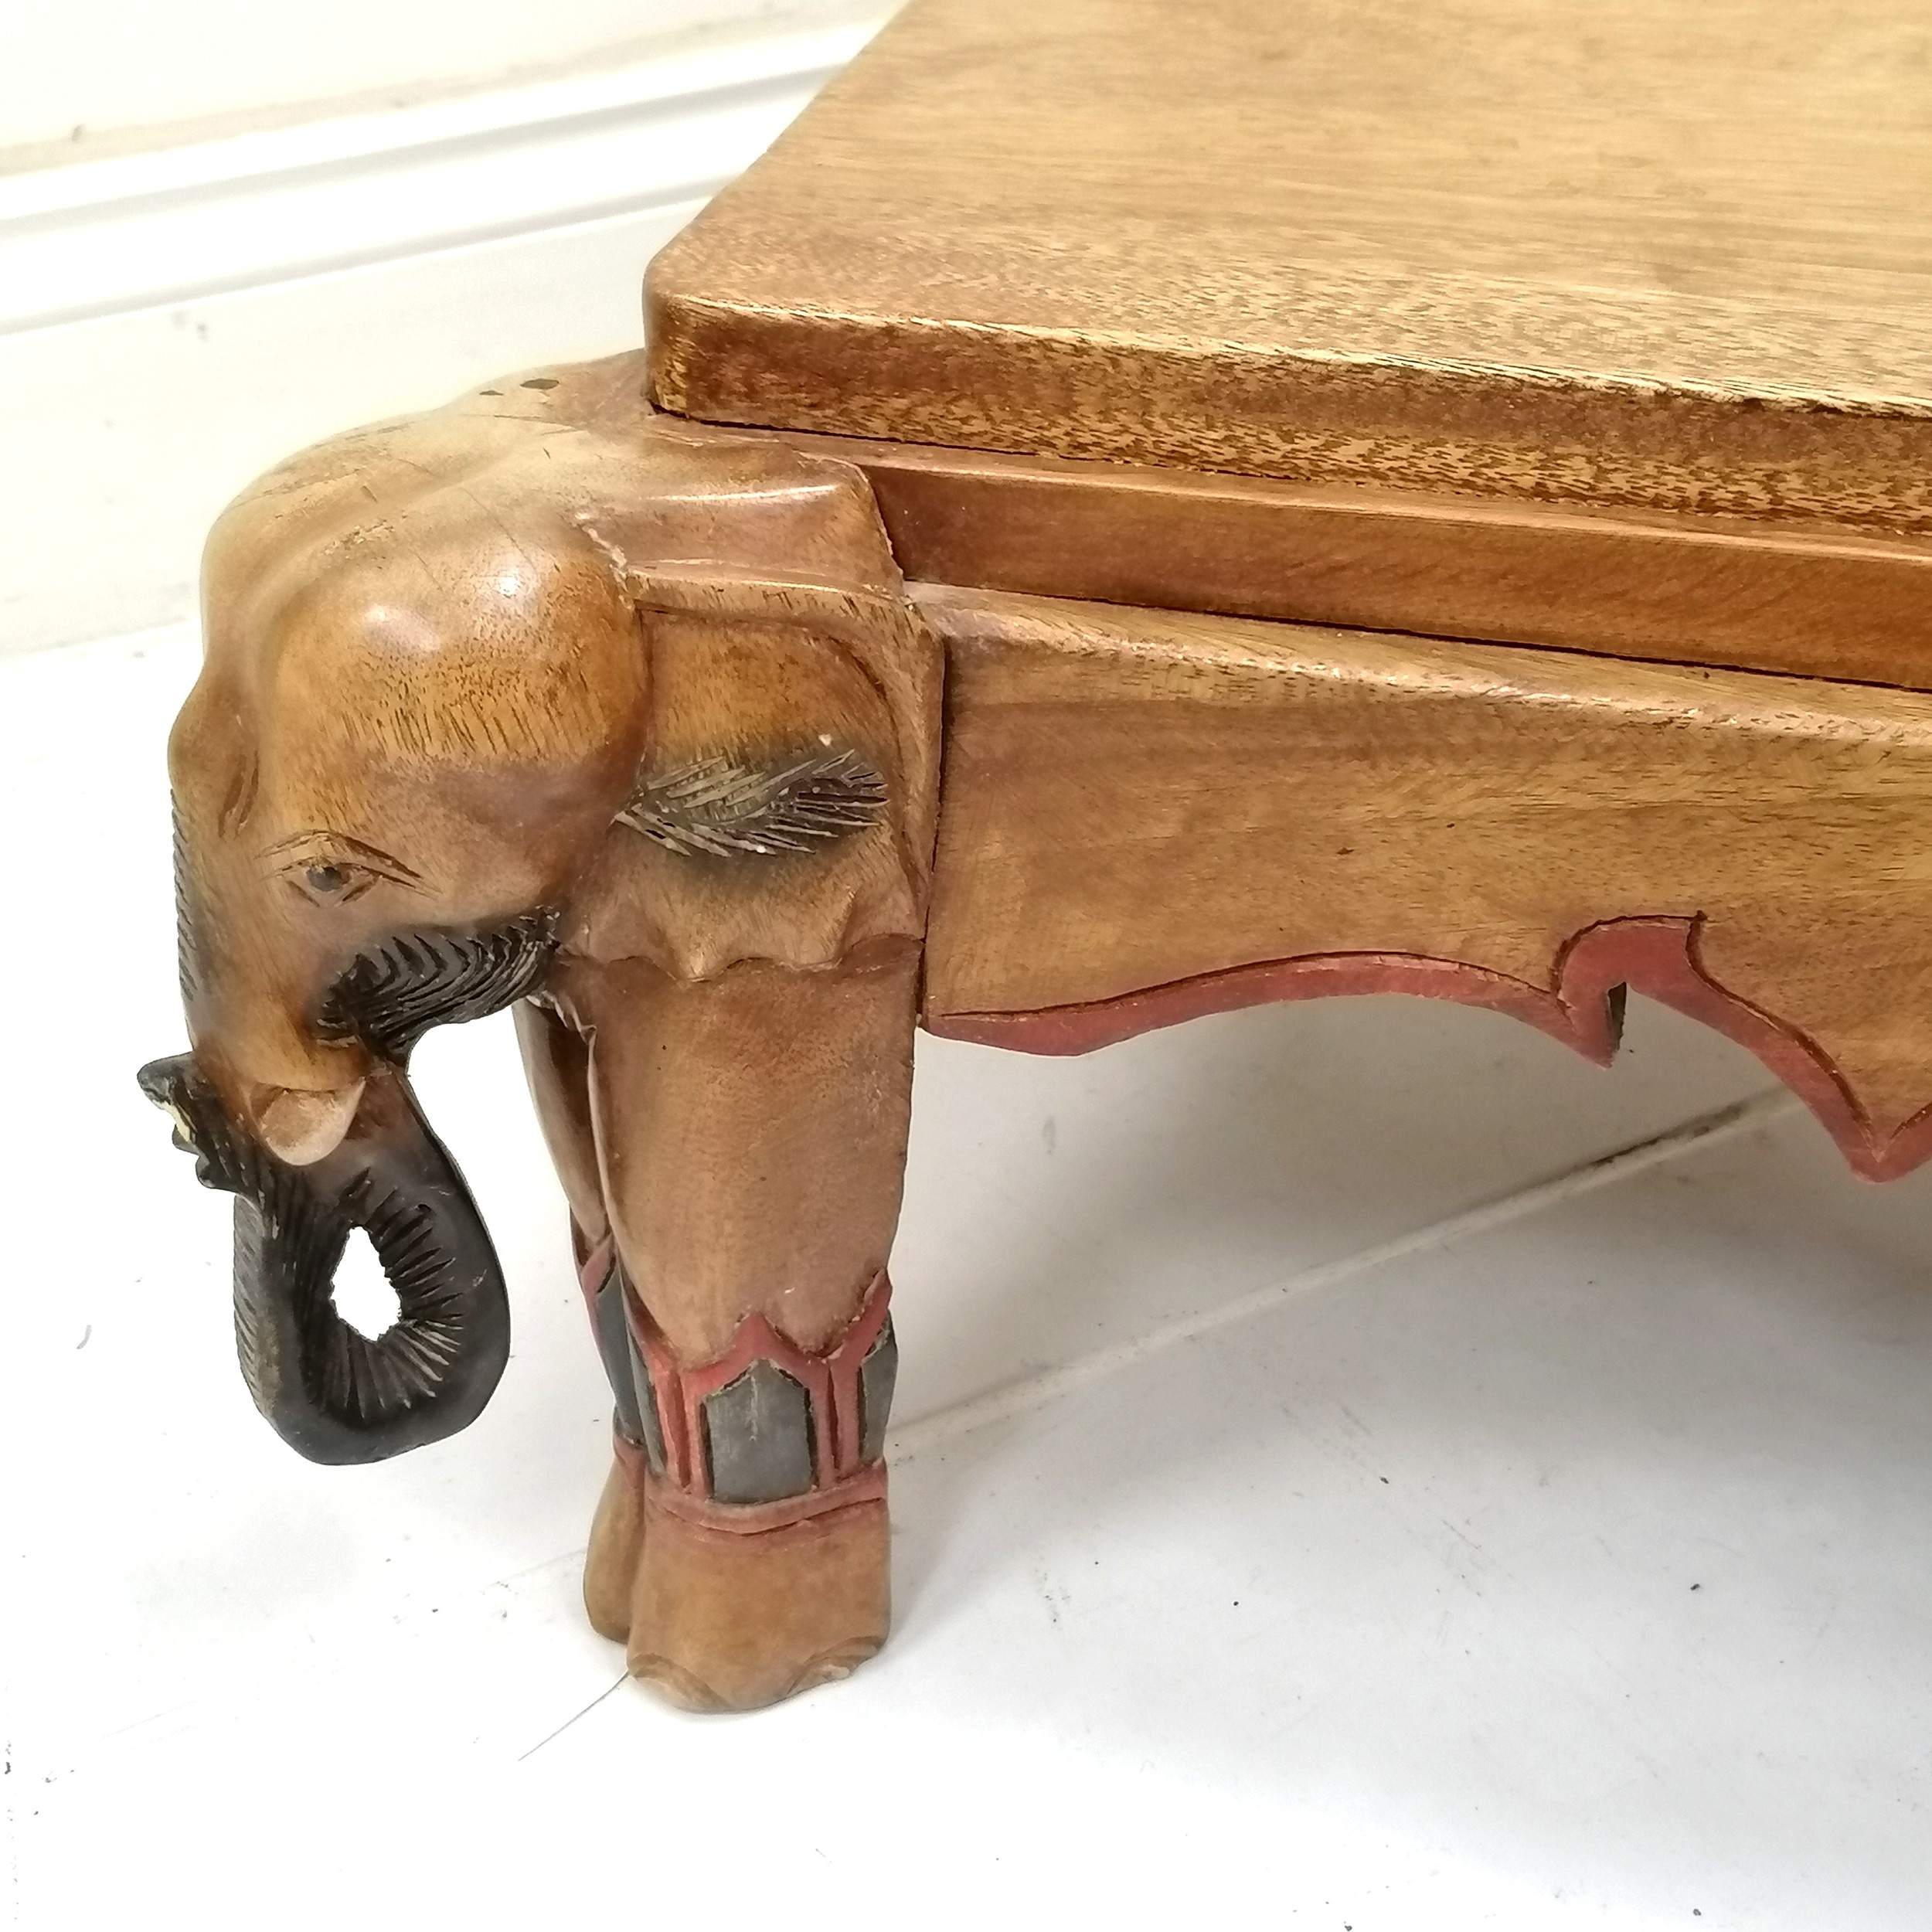 Indian carved teak coffee table with carved elephants on each corner as supports, 65 cm square x - Image 3 of 3